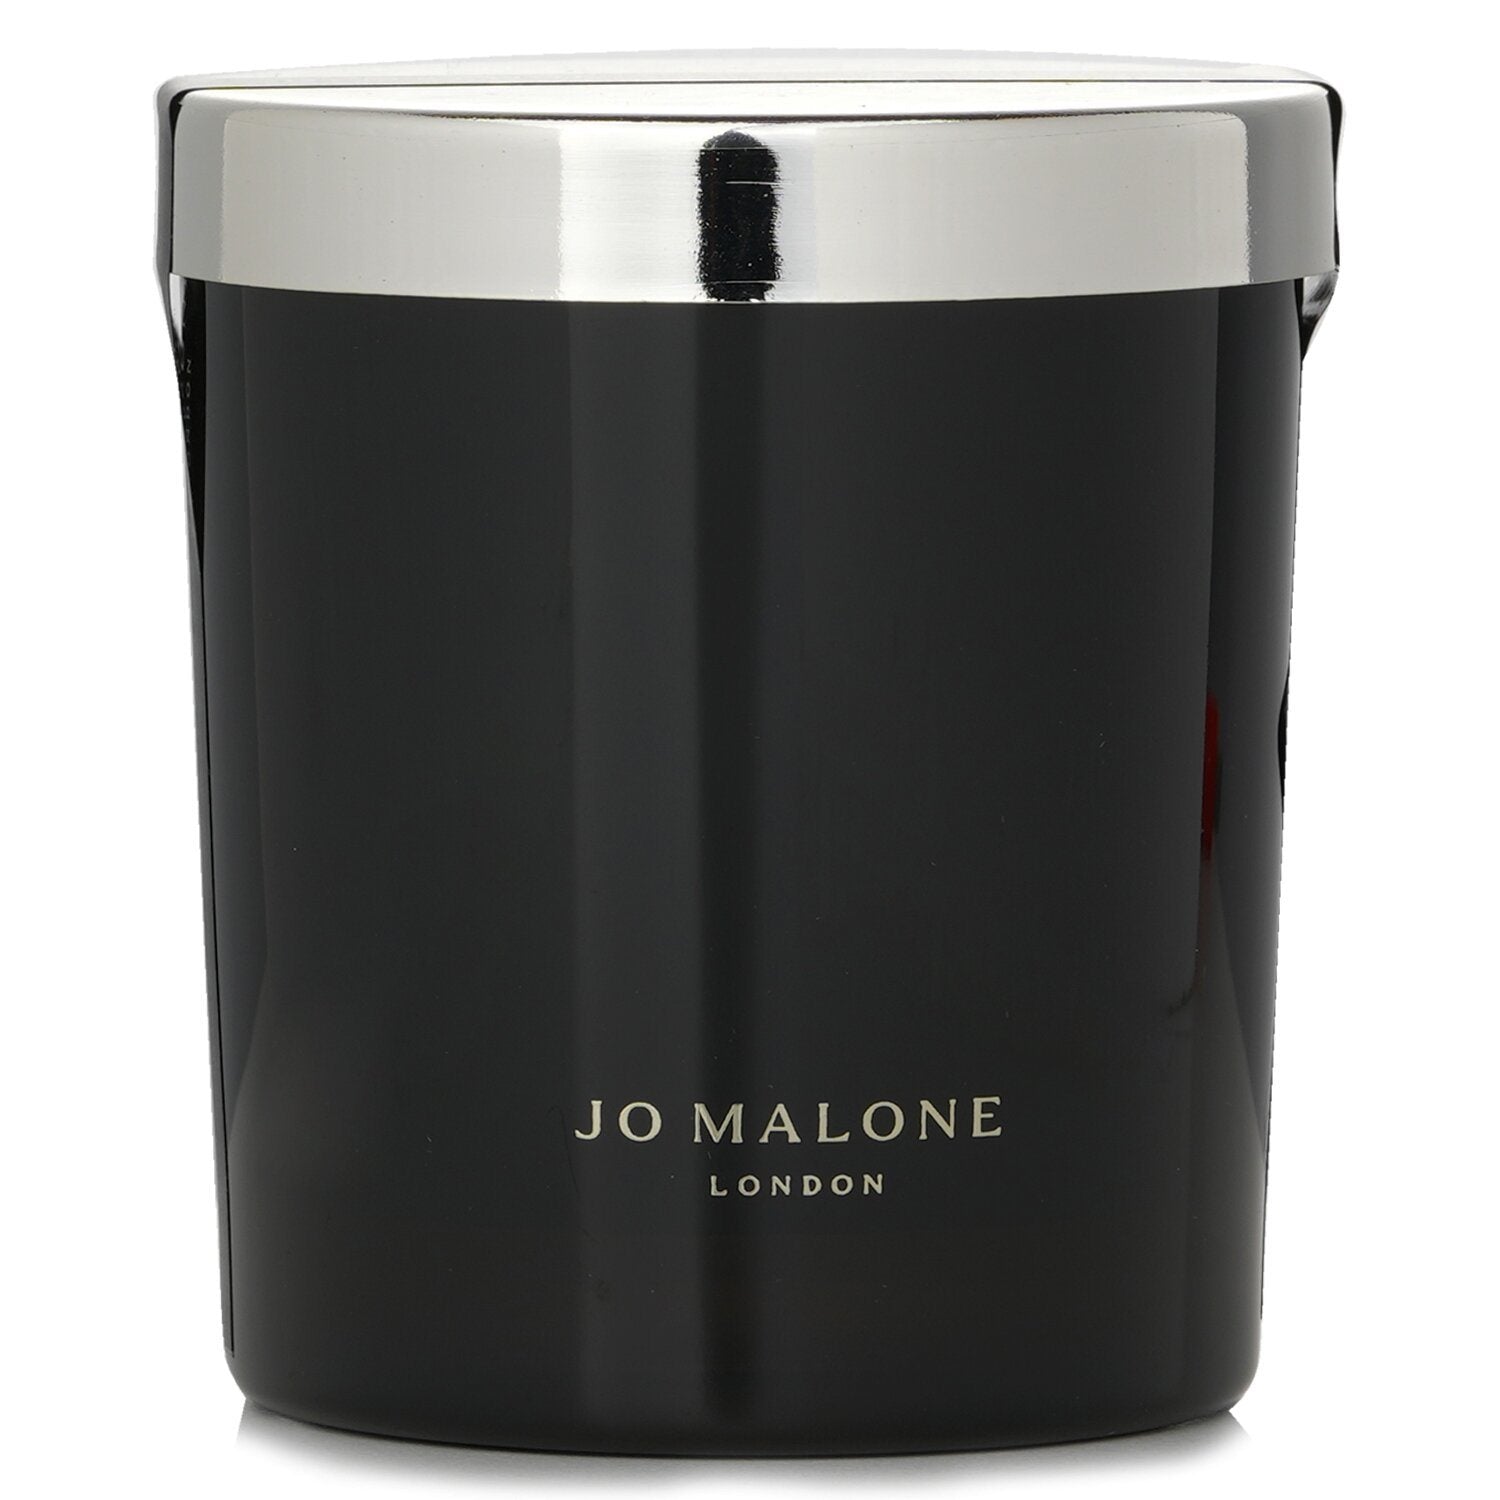 JO MALONE - Velvet Rose & Oud Scented Candle - 200g/7oz 3P's Inclusive Beauty